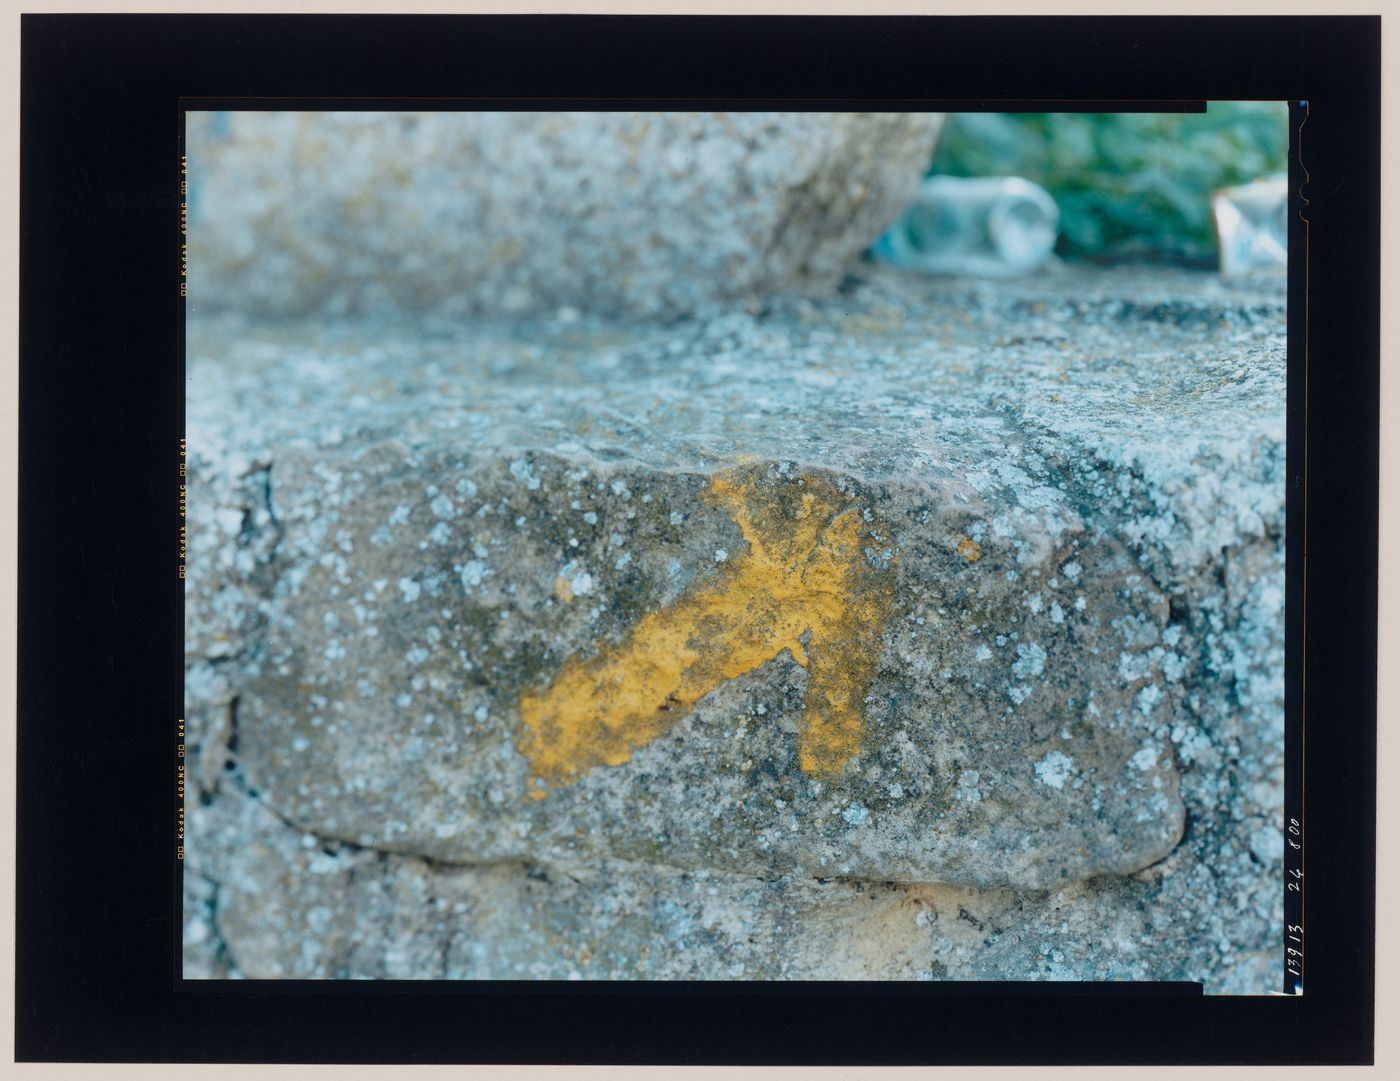 Close-up view of a stone wall bearing a painted arrow showing rubbish, Puente la Reina, Spain (from the series "In between cities")